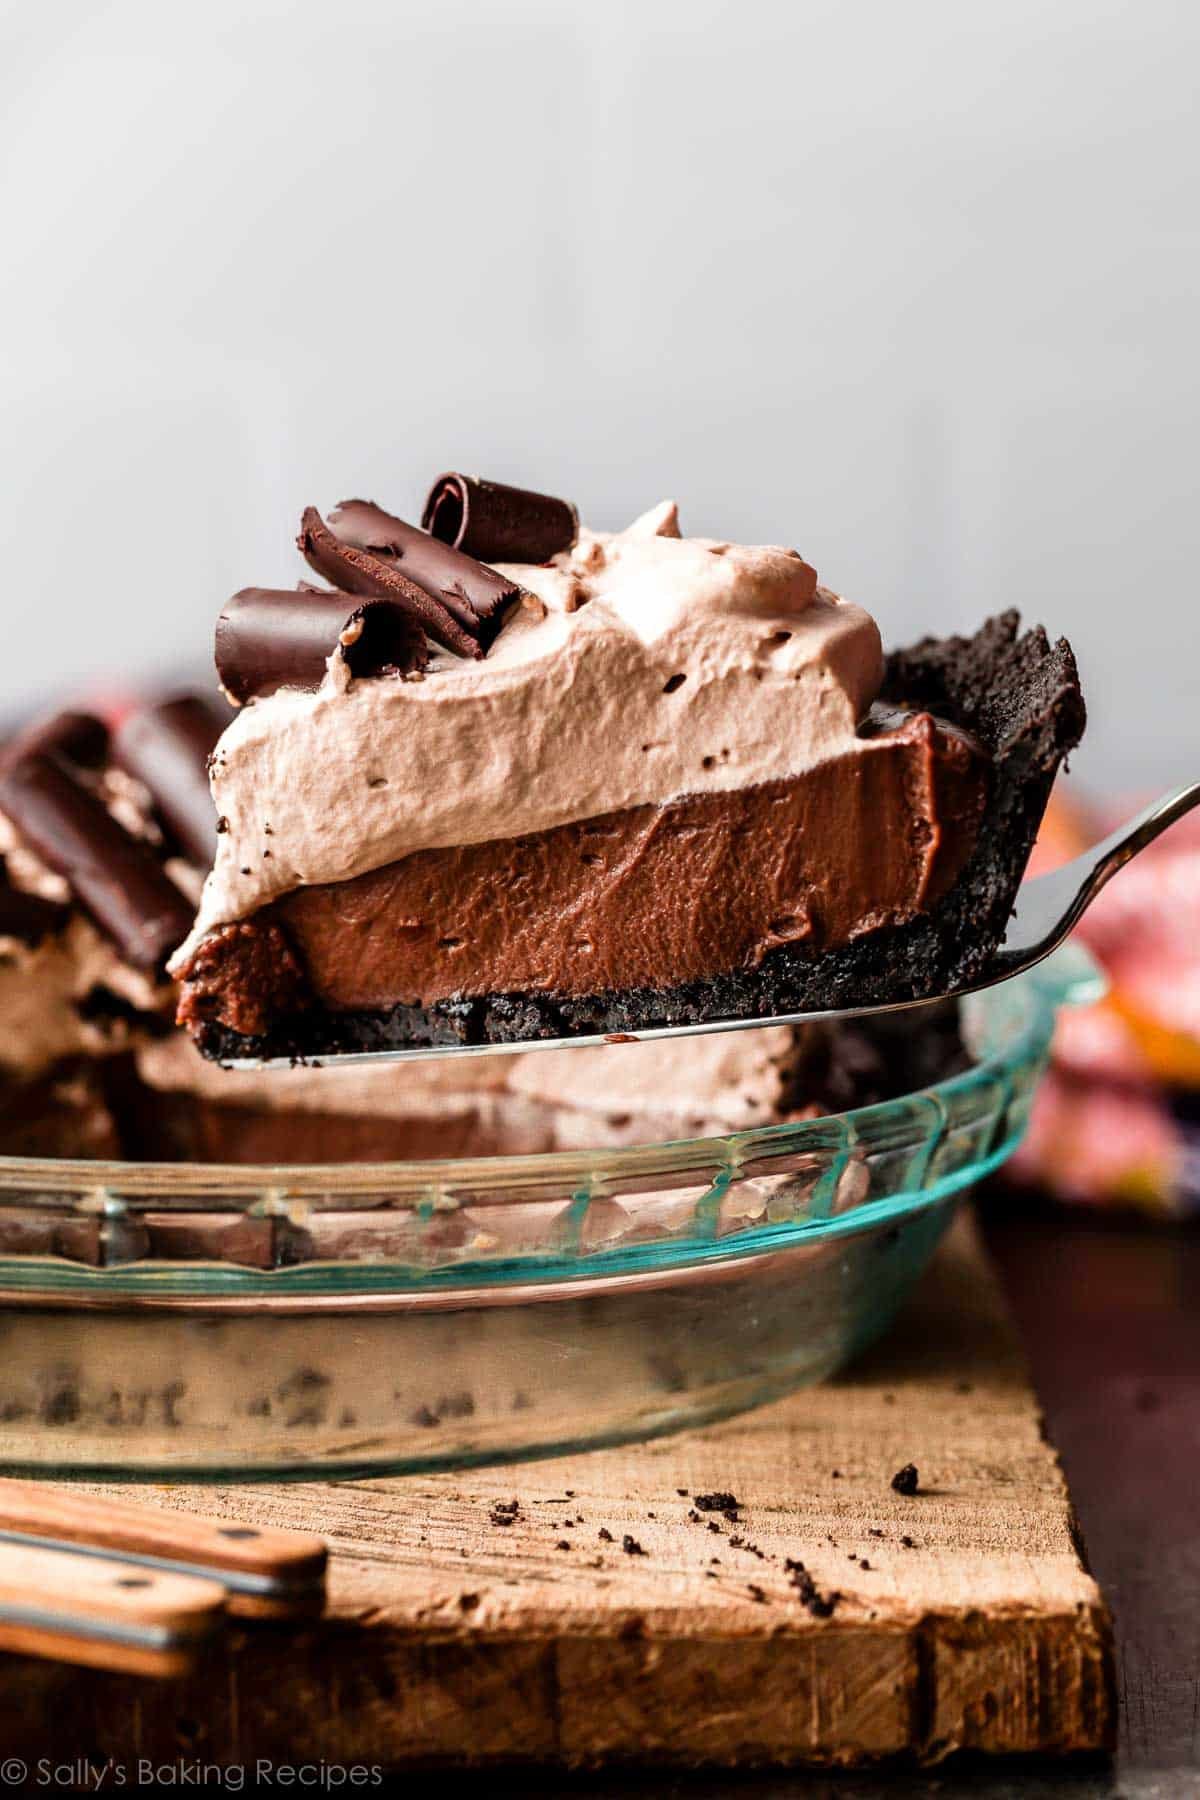 slice of chocolate pudding pie with mocha whipped cream and chocolate curls on top.